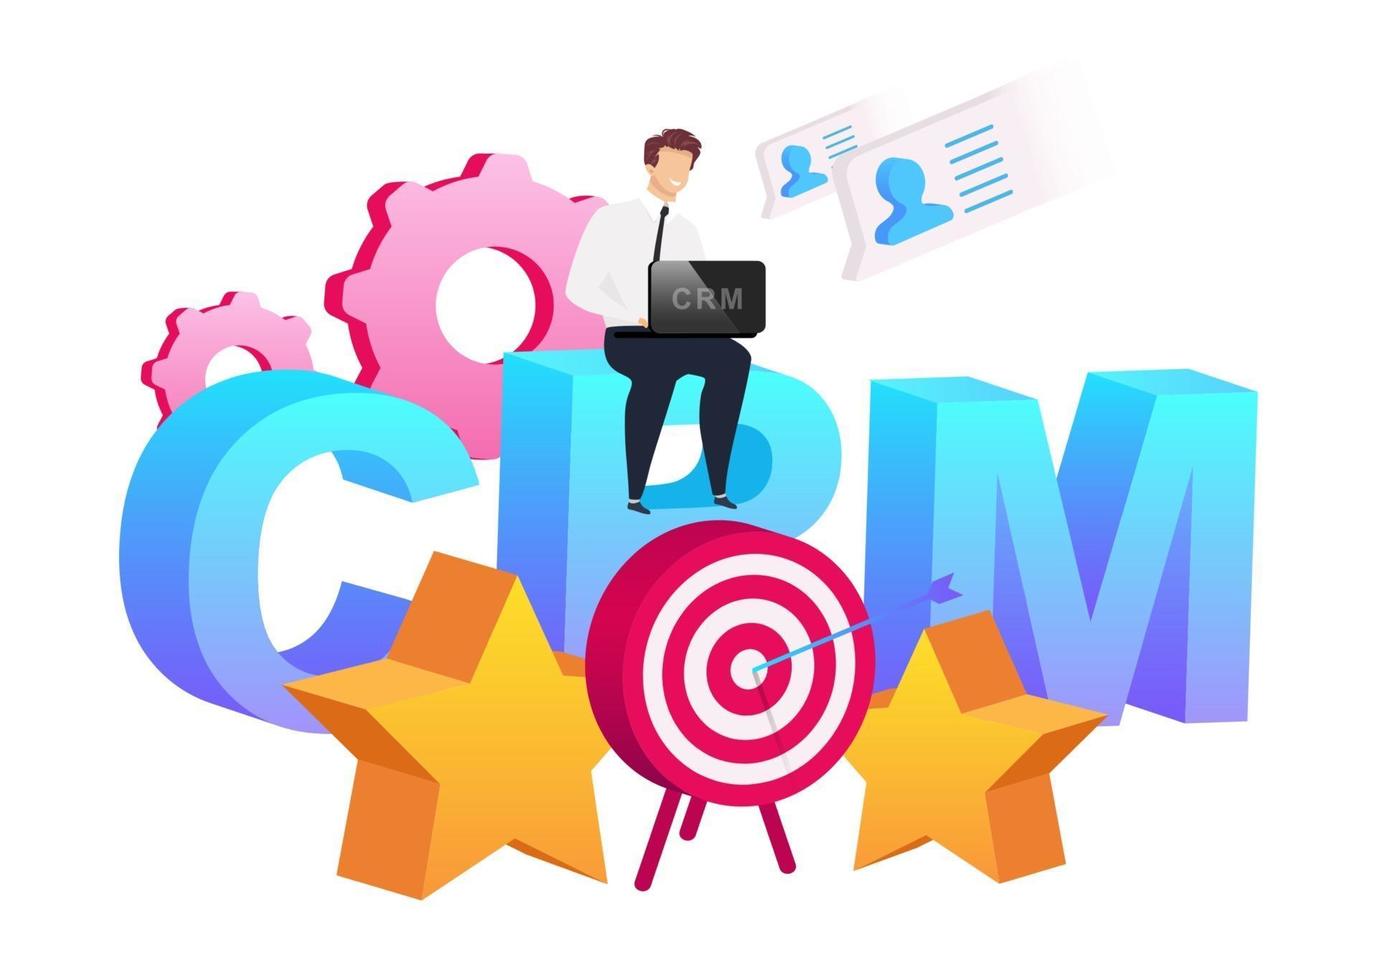 Improving information flat concept vector illustration. Smiling man sitting on word collection 2D cartoon character for web design. Arrow in target and stars. Cogwheels. CRM system creative idea